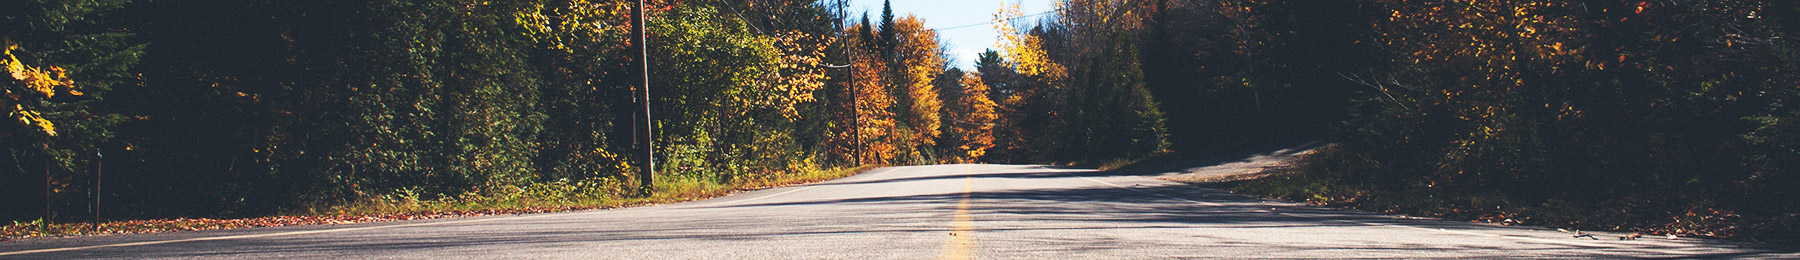 close up low view of county road in autumn